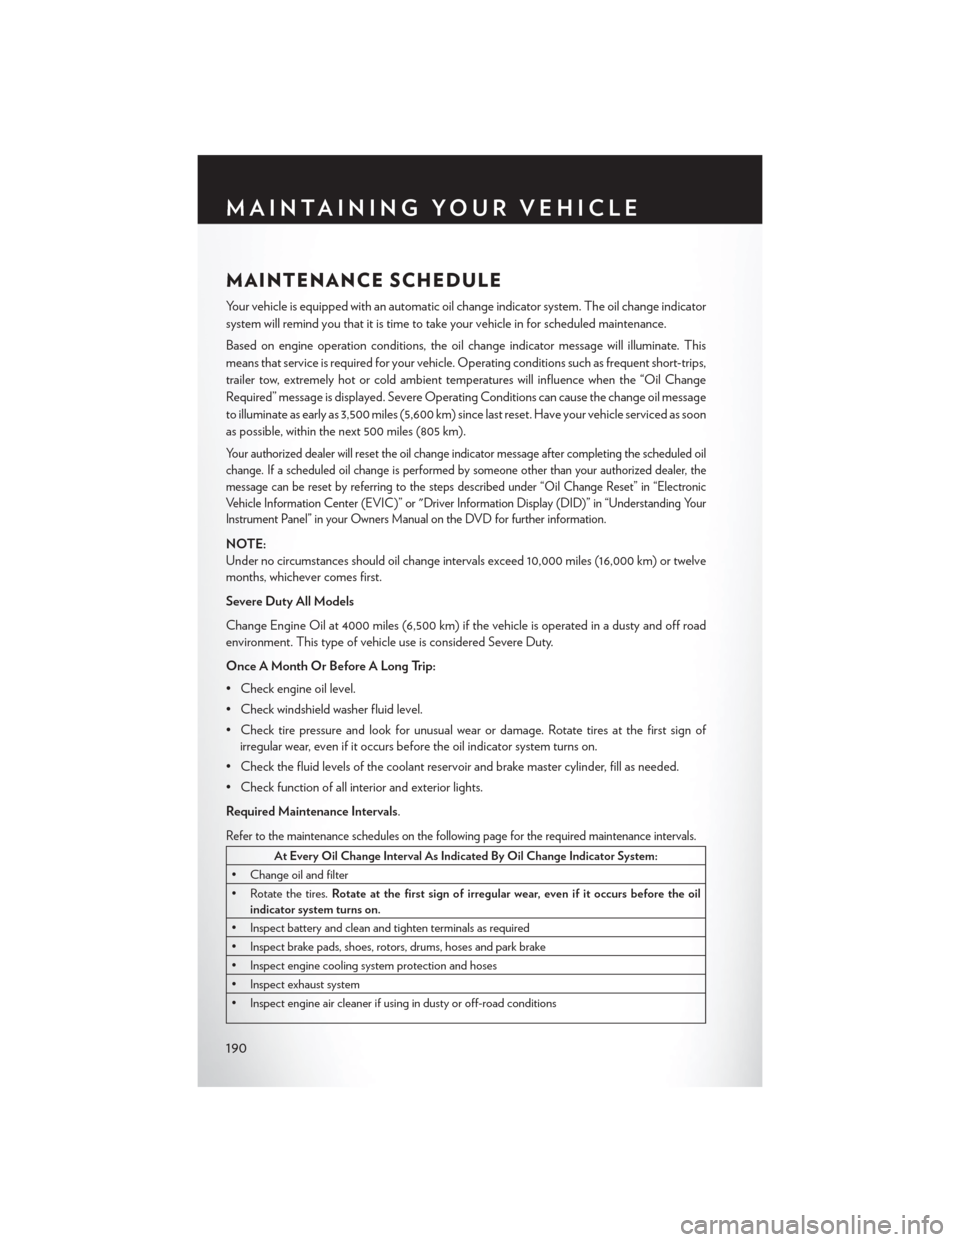 CHRYSLER 200 2015 2.G User Guide MAINTENANCE SCHEDULE
Your vehicle is equipped with an automatic oil change indicator system. The oil change indicator
system will remind you that it is time to take your vehicle in for scheduled maint